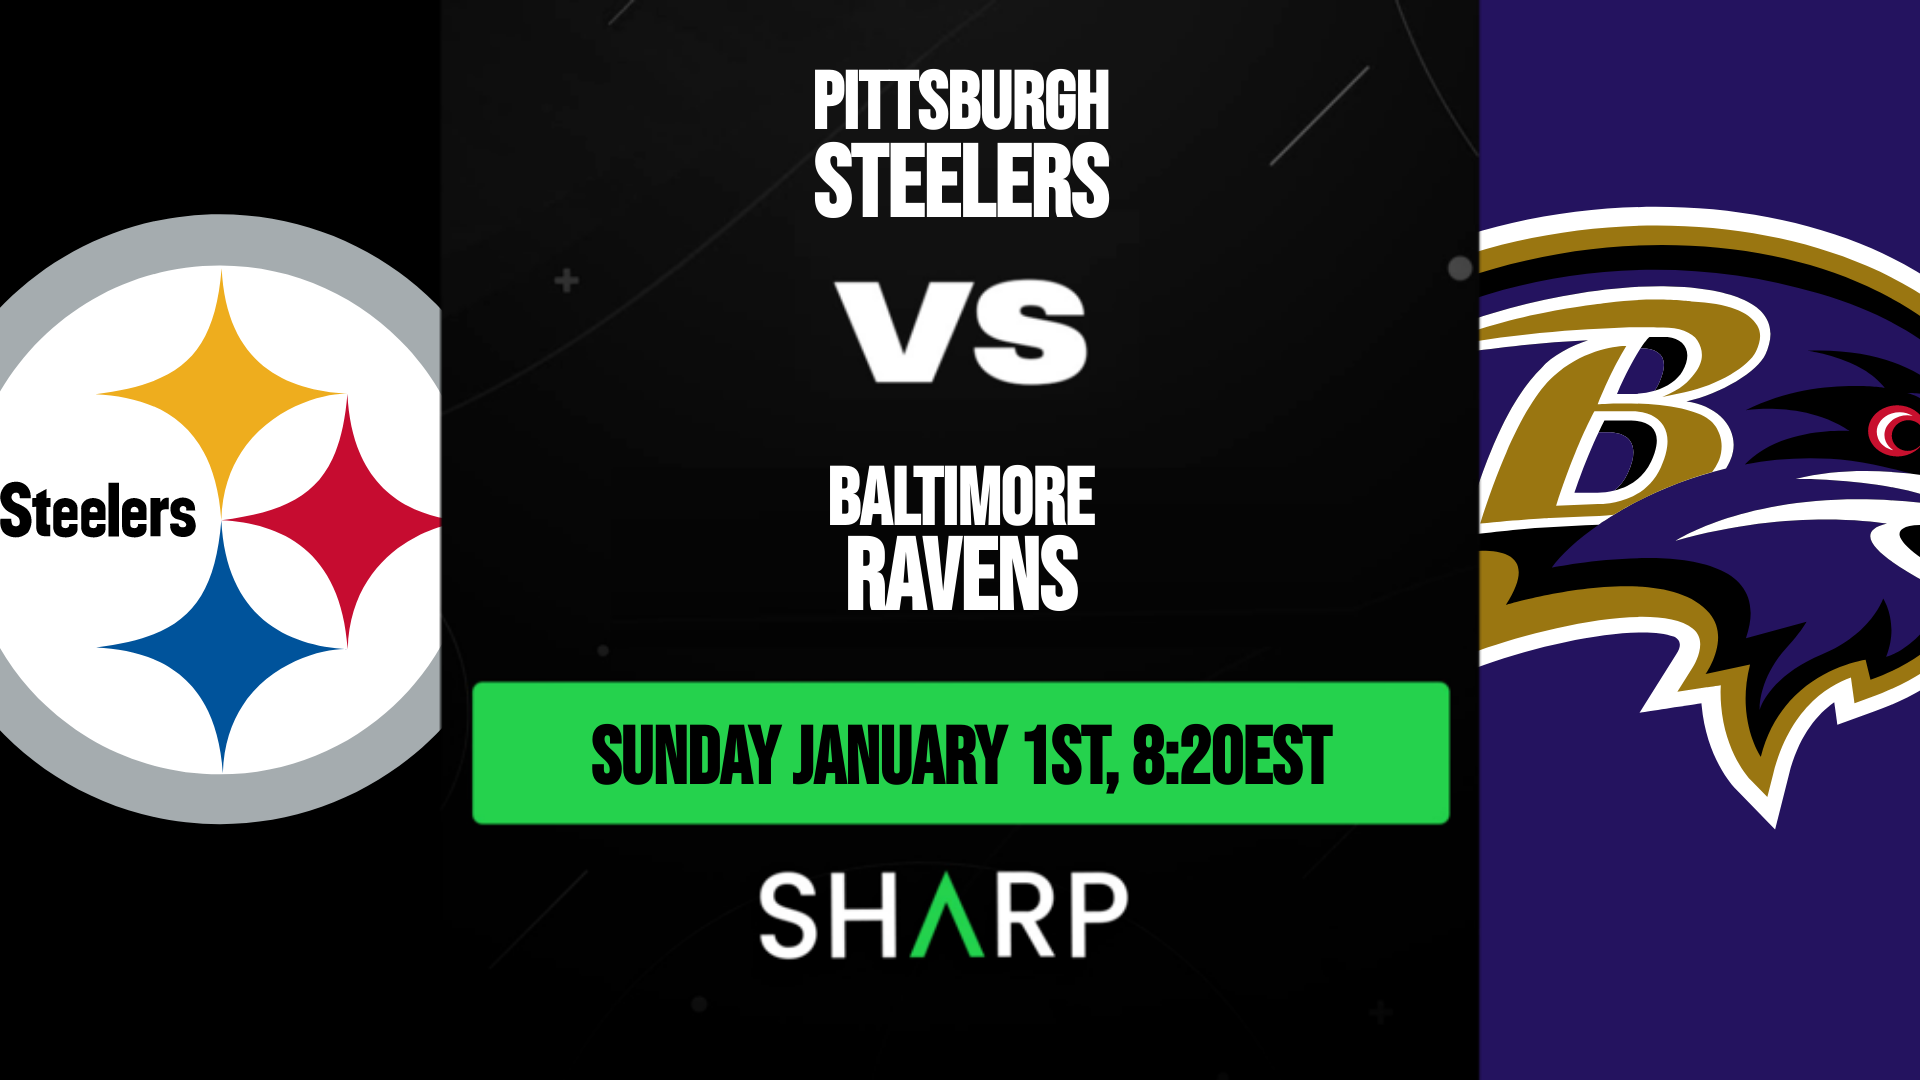 Pittsburgh Steelers vs Baltimore Ravens Matchup Preview - January